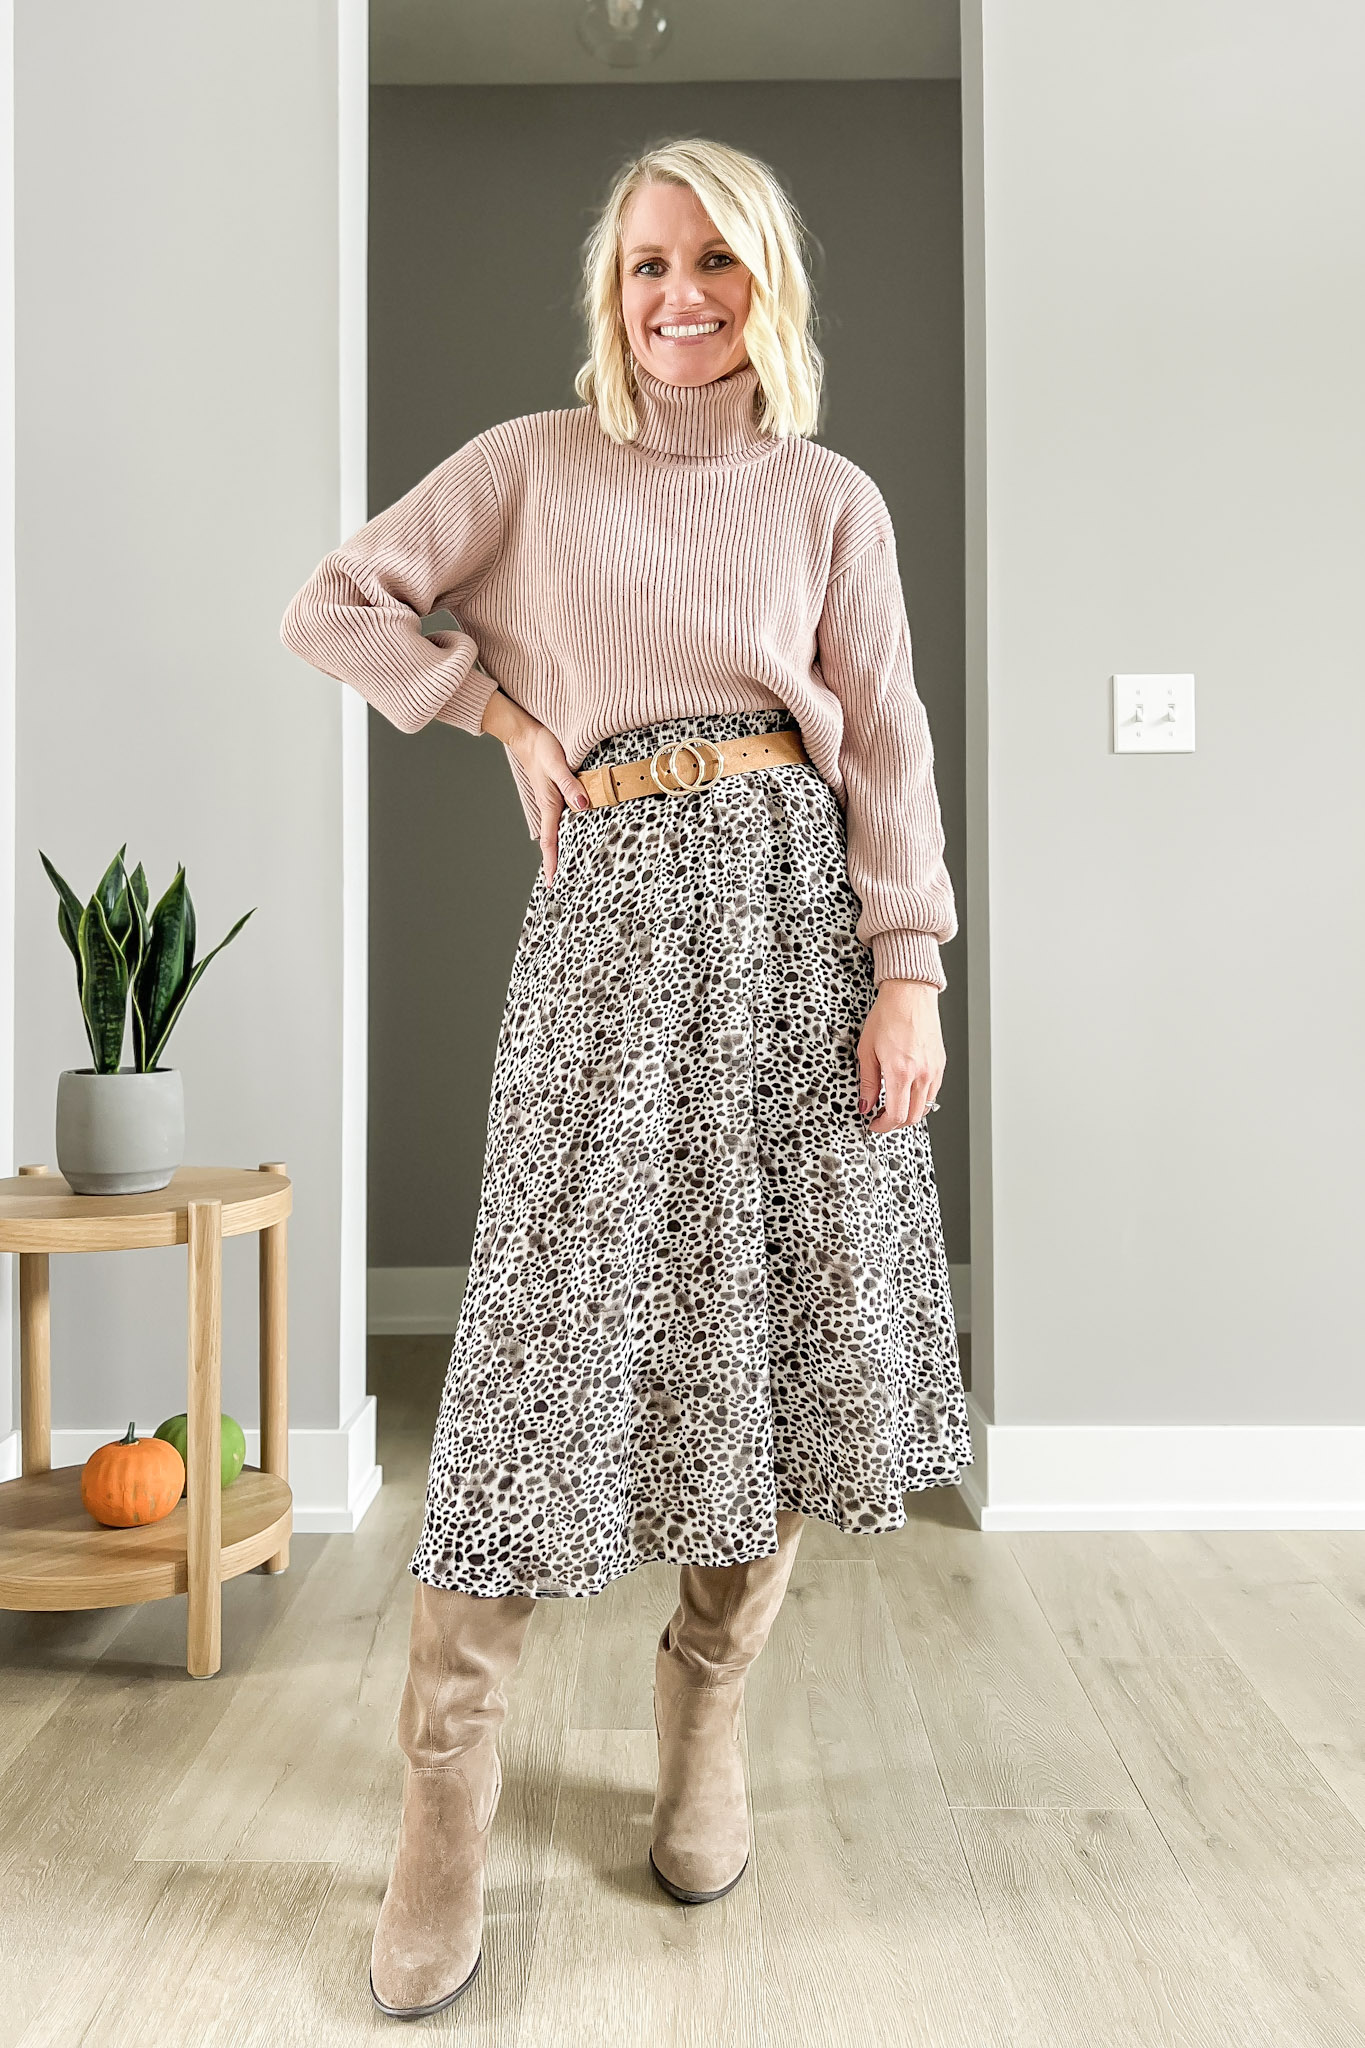 How to wear tall boots- midi skirt